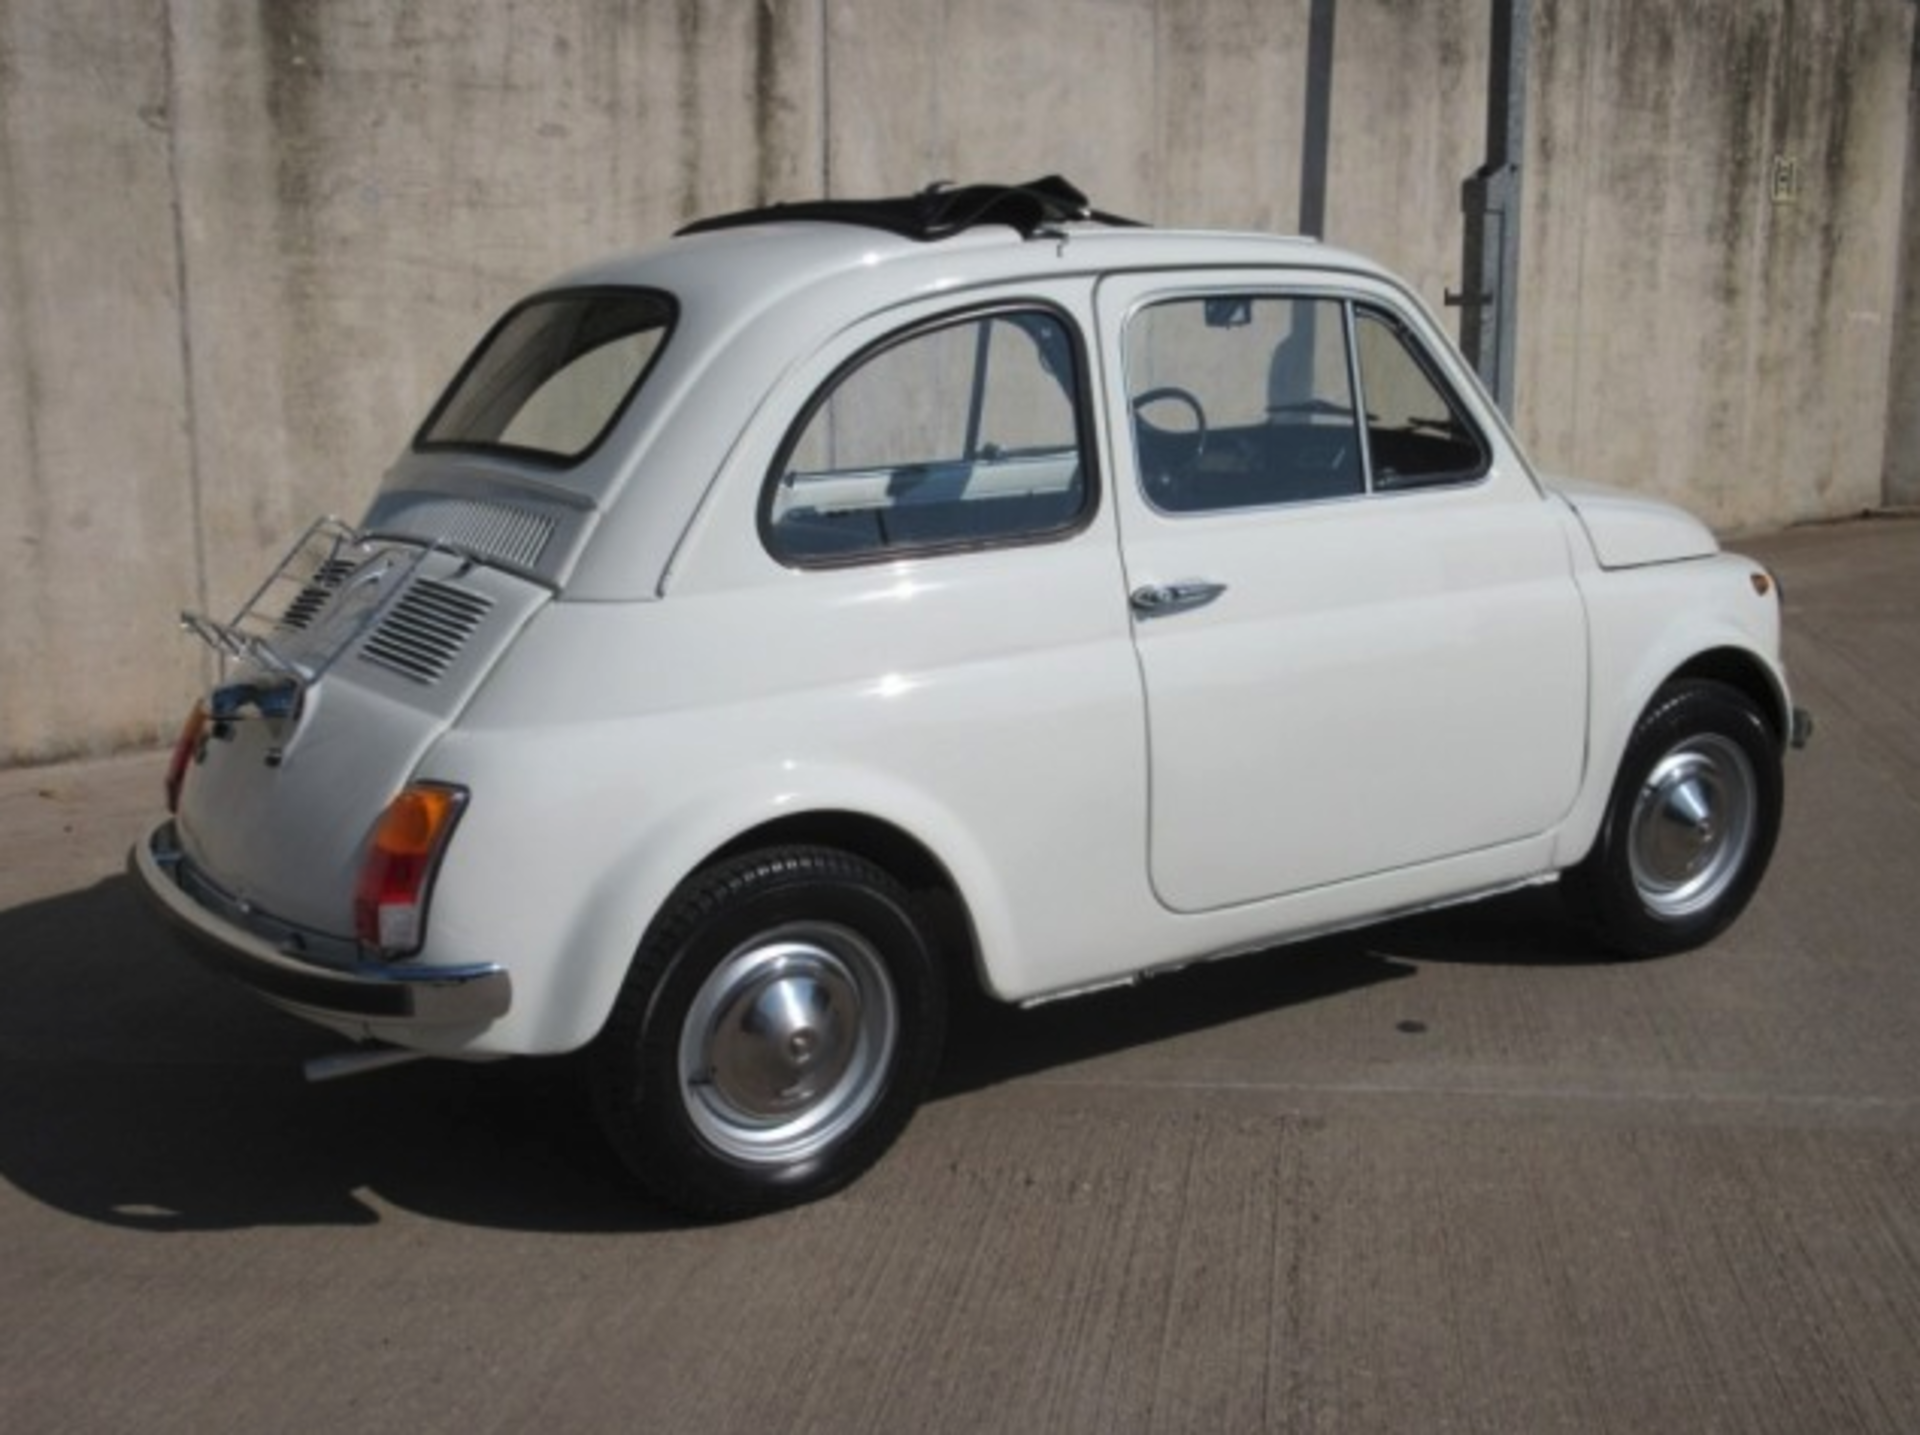 Fiat 500 in White Fully Restored & Detailed - Image 14 of 18